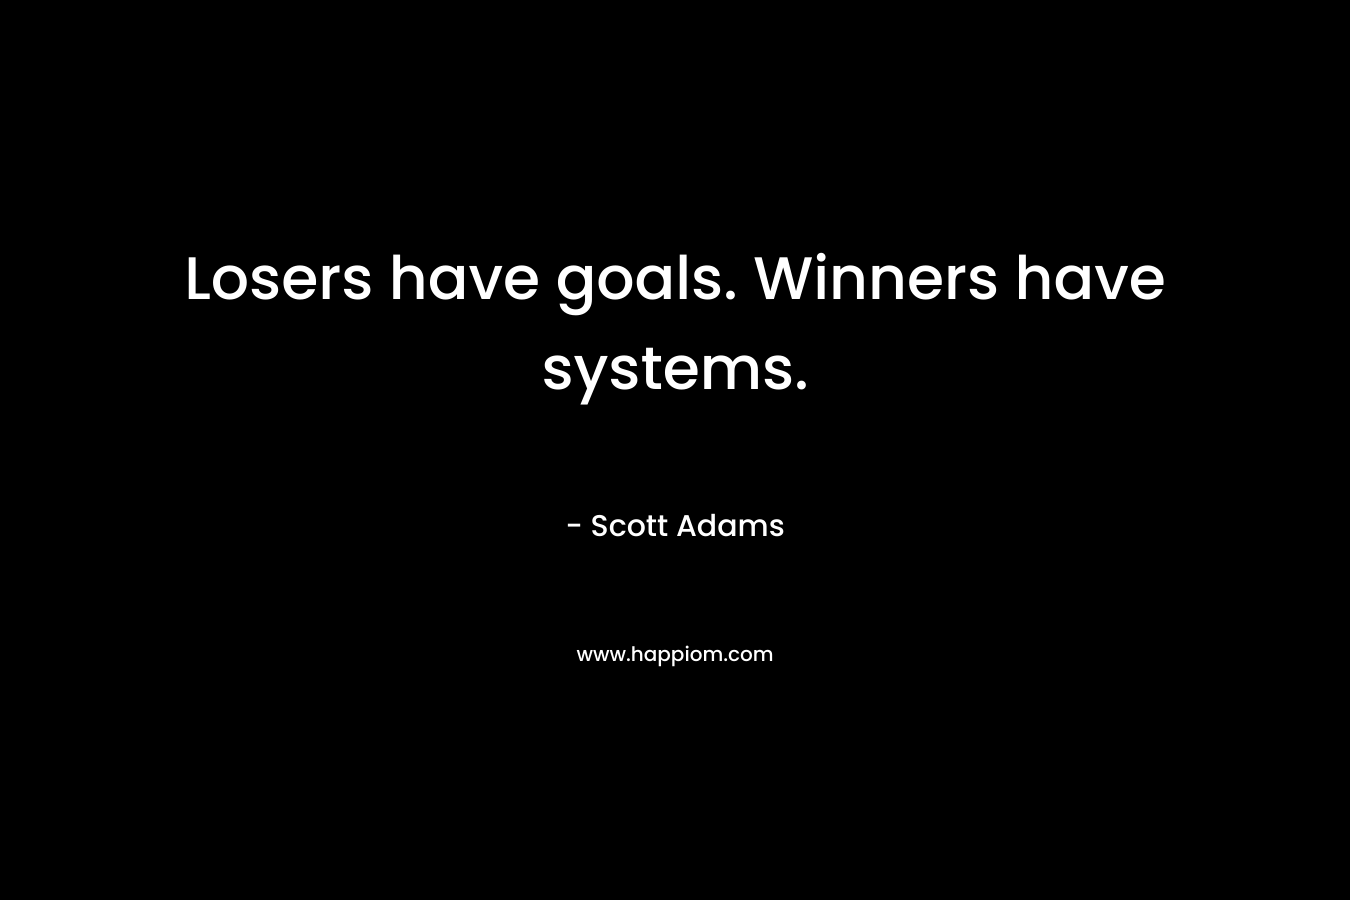 Losers have goals. Winners have systems. – Scott Adams